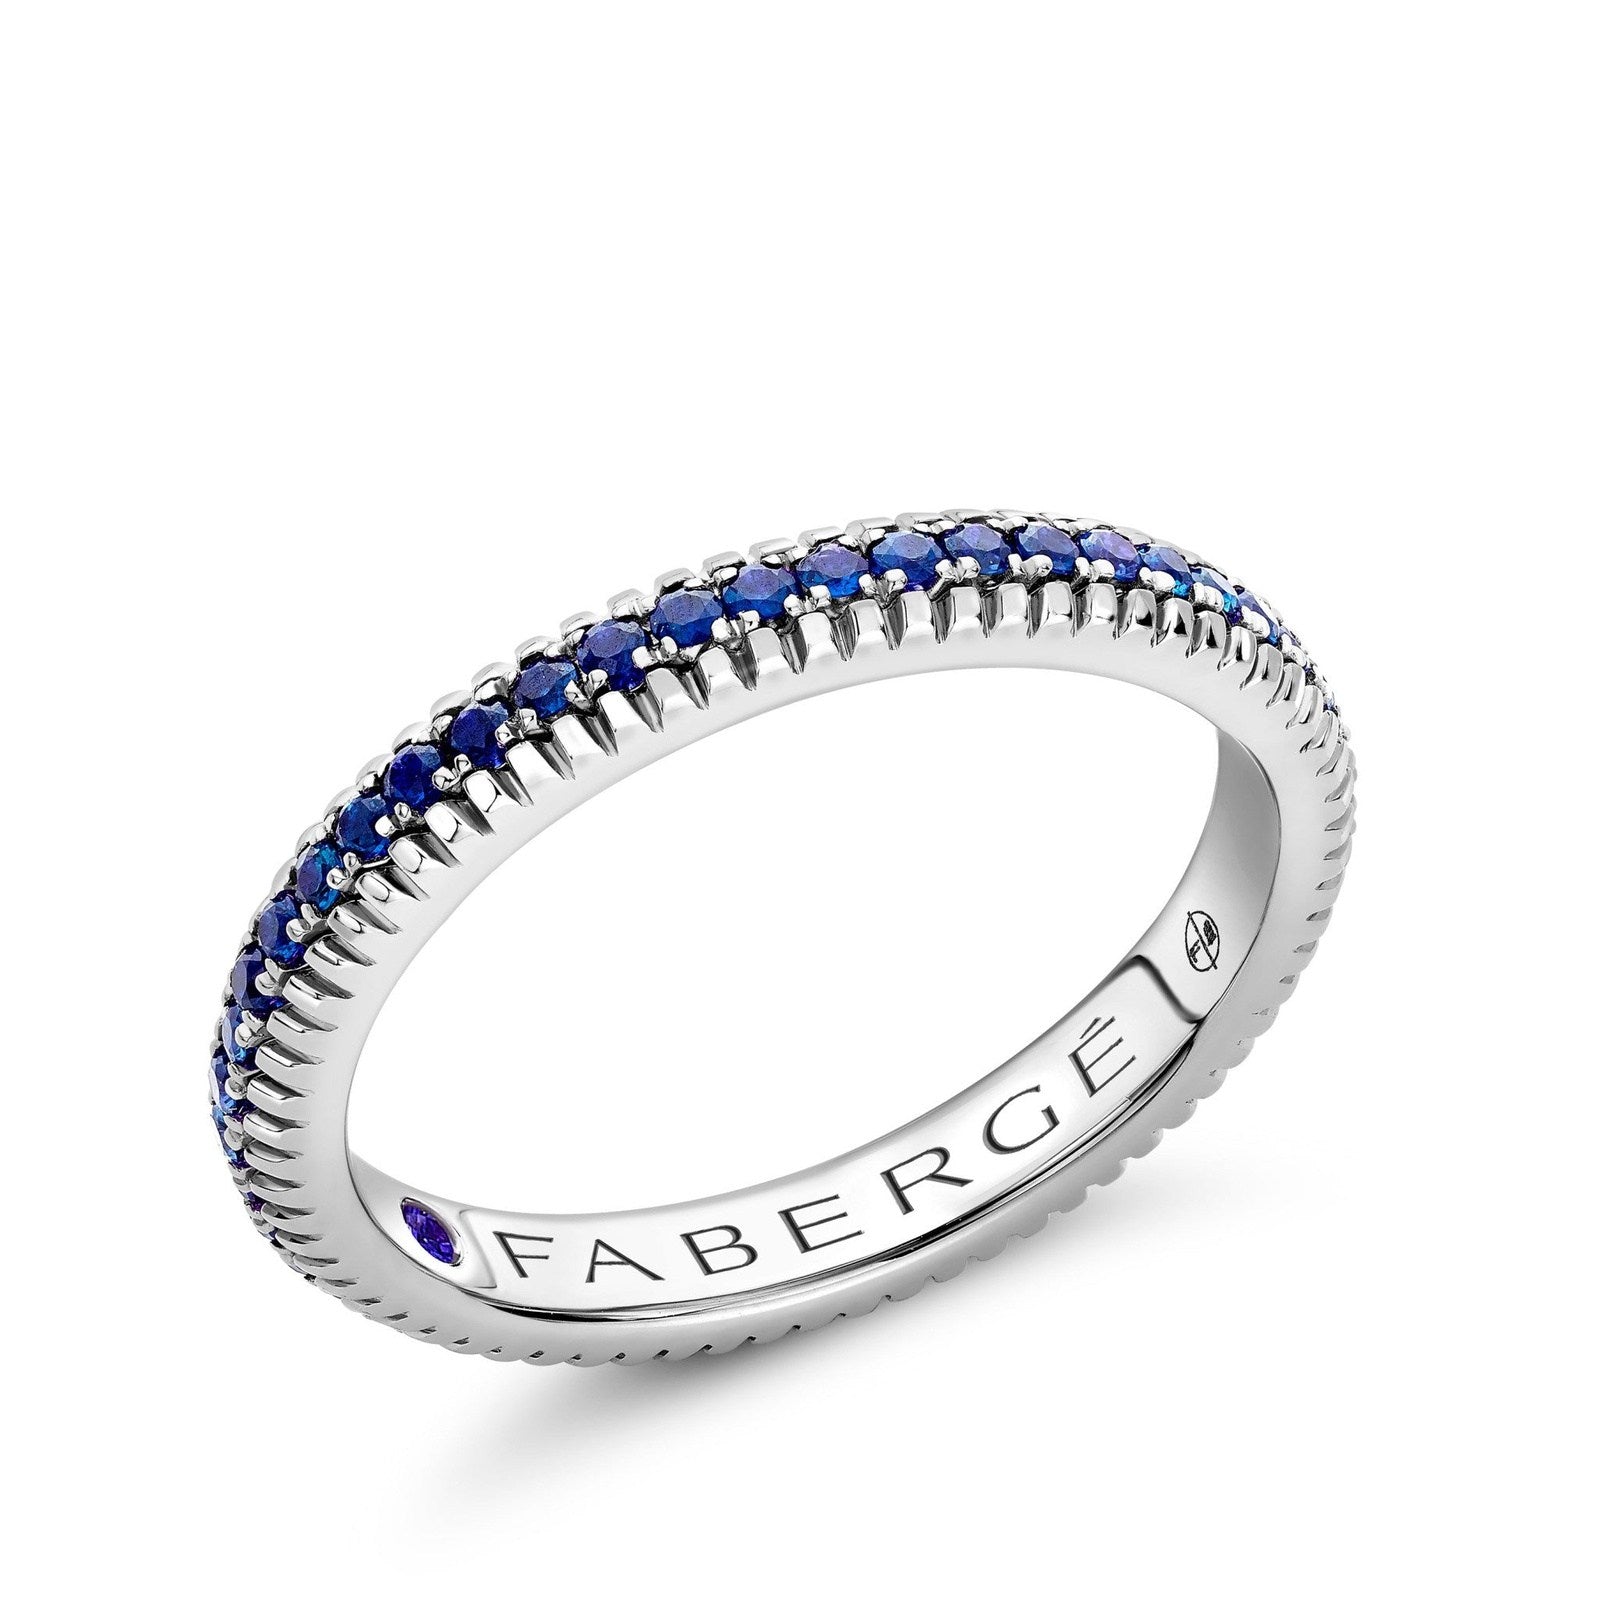 Faberge Colours of Love White Gold Blue Sapphire Set Fluted Ring  - 847RG1752